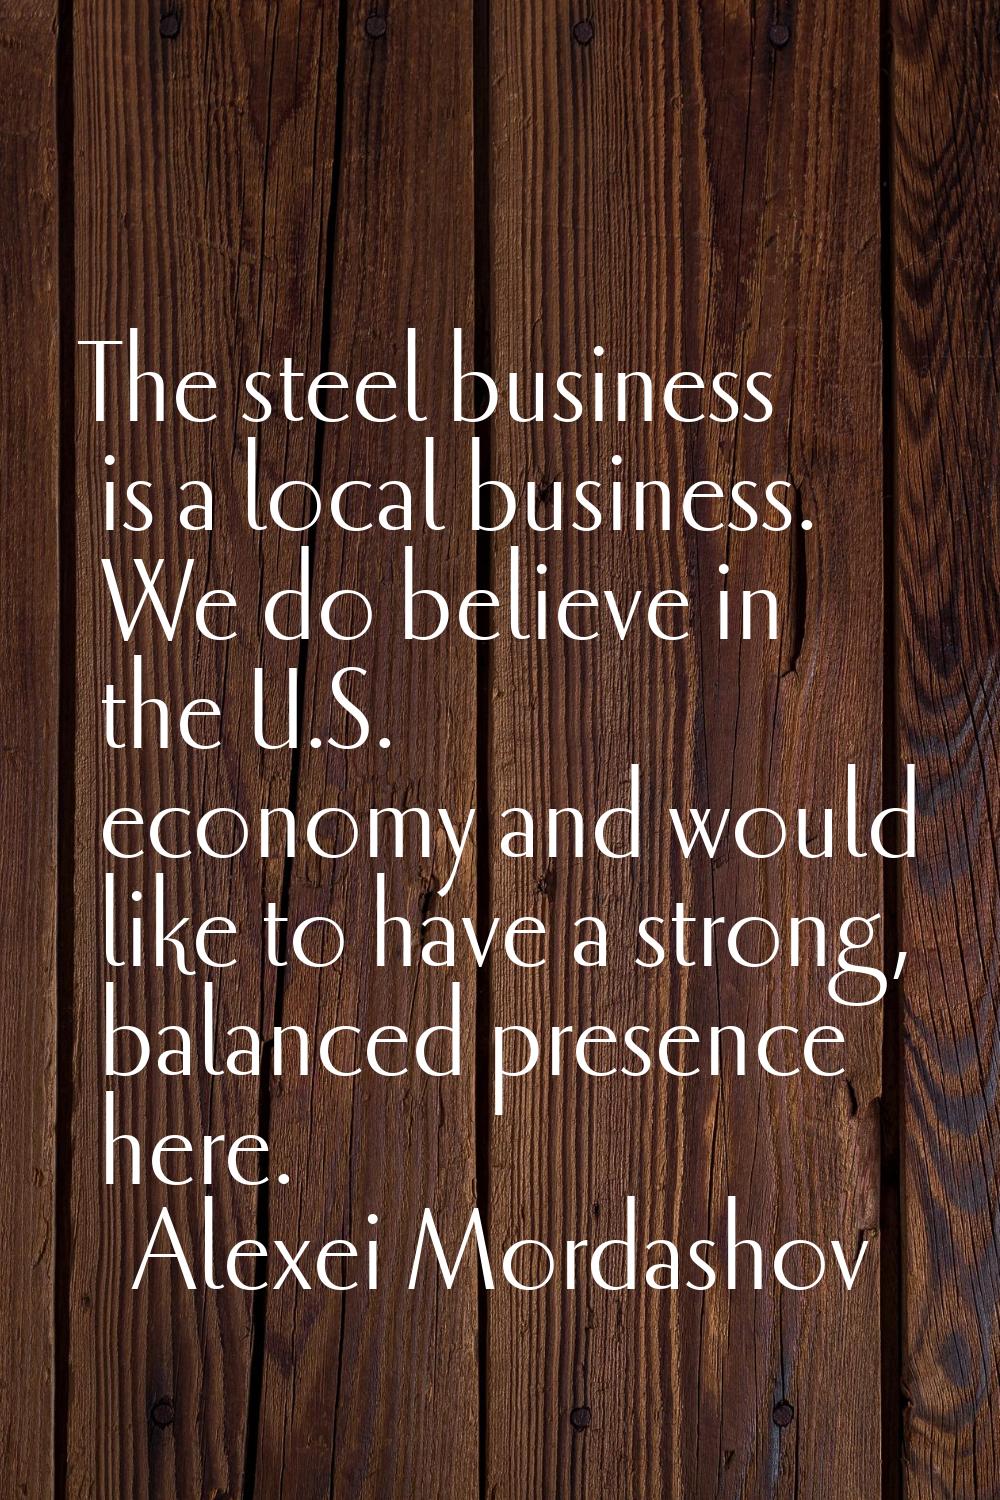 The steel business is a local business. We do believe in the U.S. economy and would like to have a 